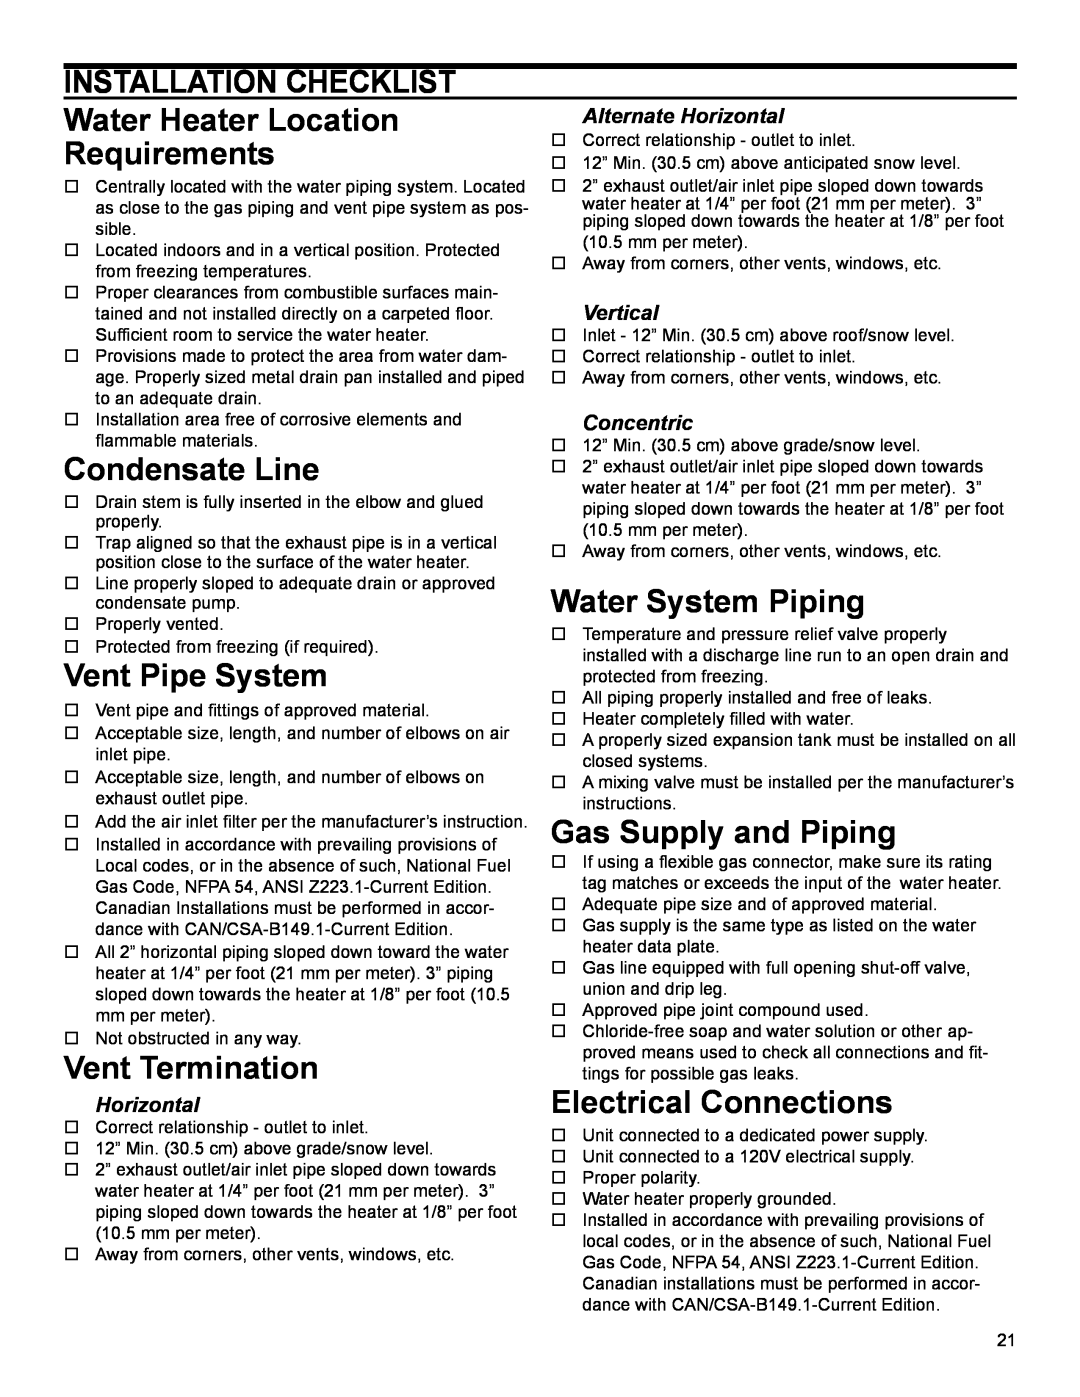 Polaris PC 175-50 3NV Installation Checklist, Water Heater Location, Requirements, Condensate Line, Water System Piping 